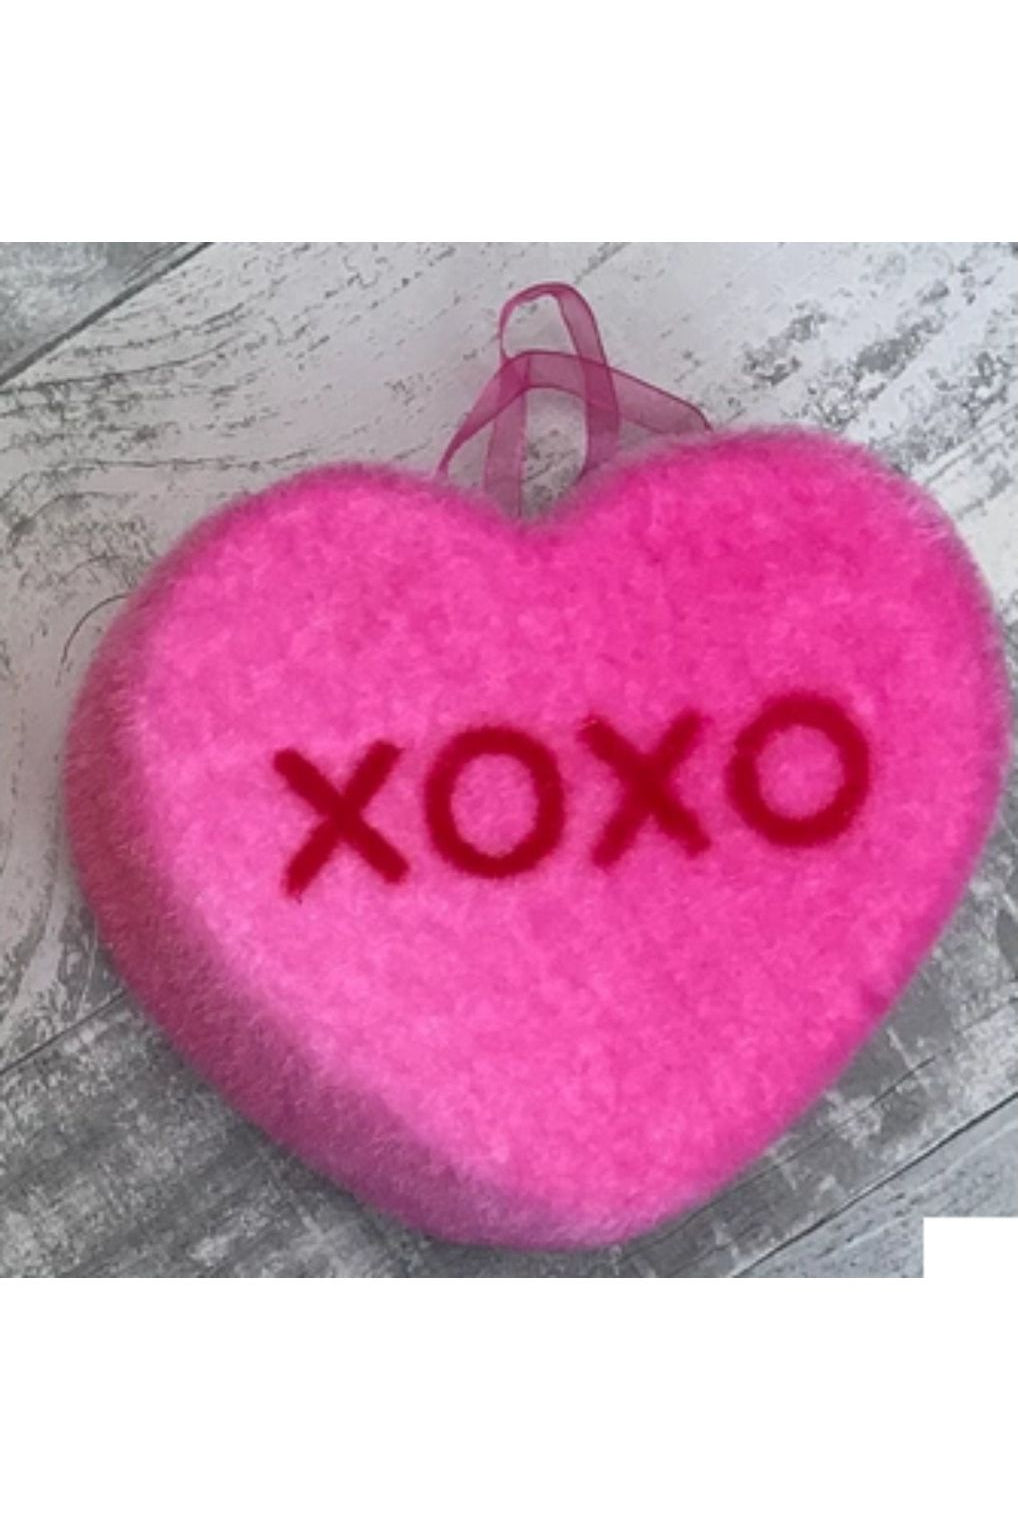 Shop For 180 Degrees 6" Flocked Conversation Hearts (Assorted) WH0185